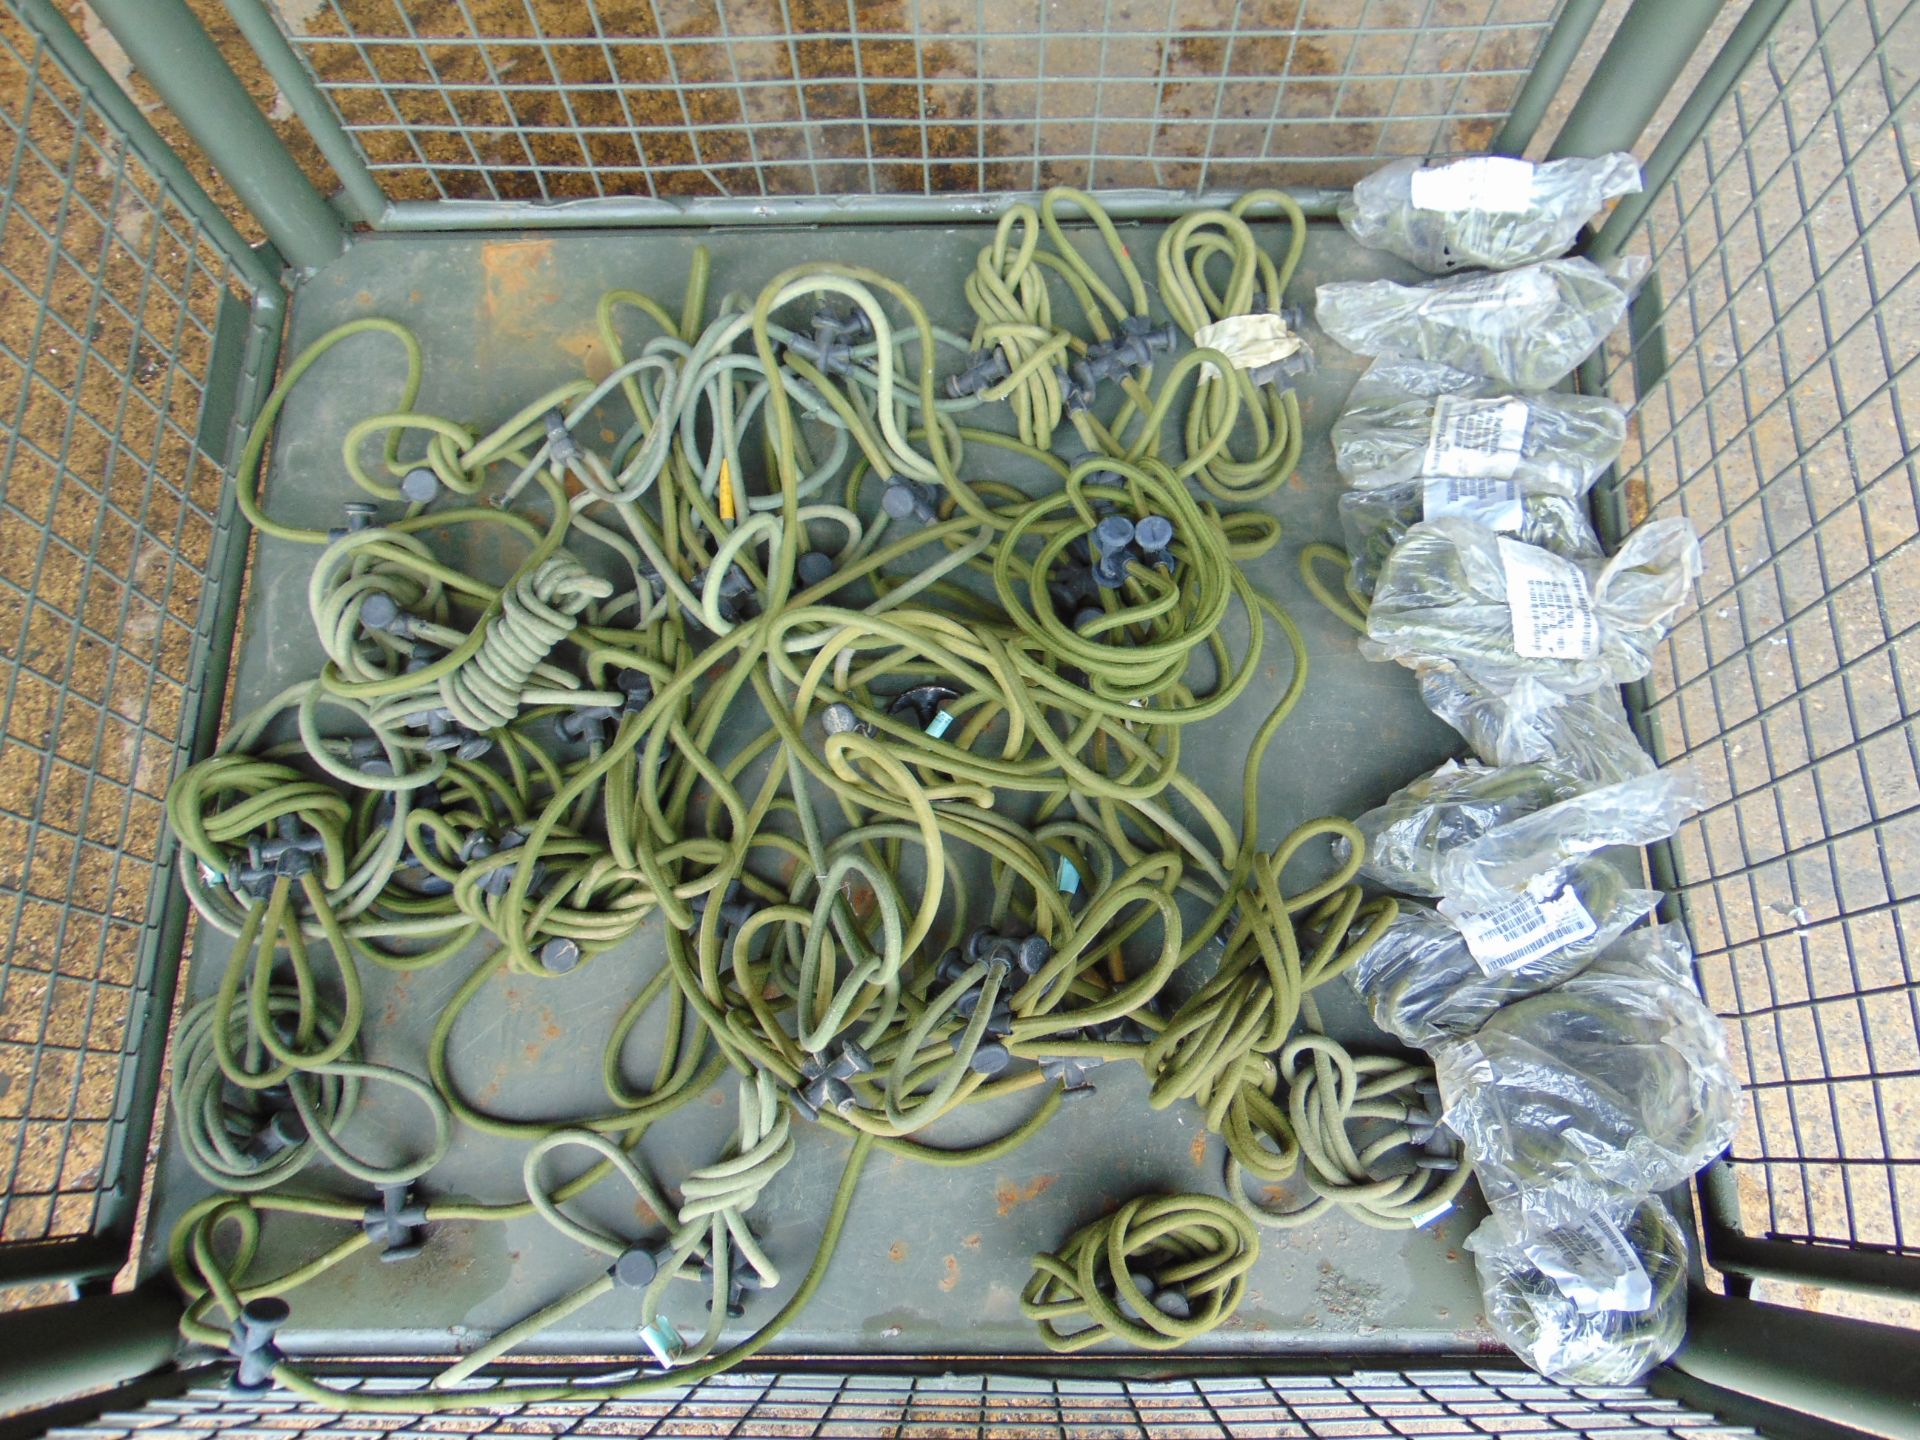 1 x Stillage of Elastic Bungee Securing Cords - Image 2 of 5